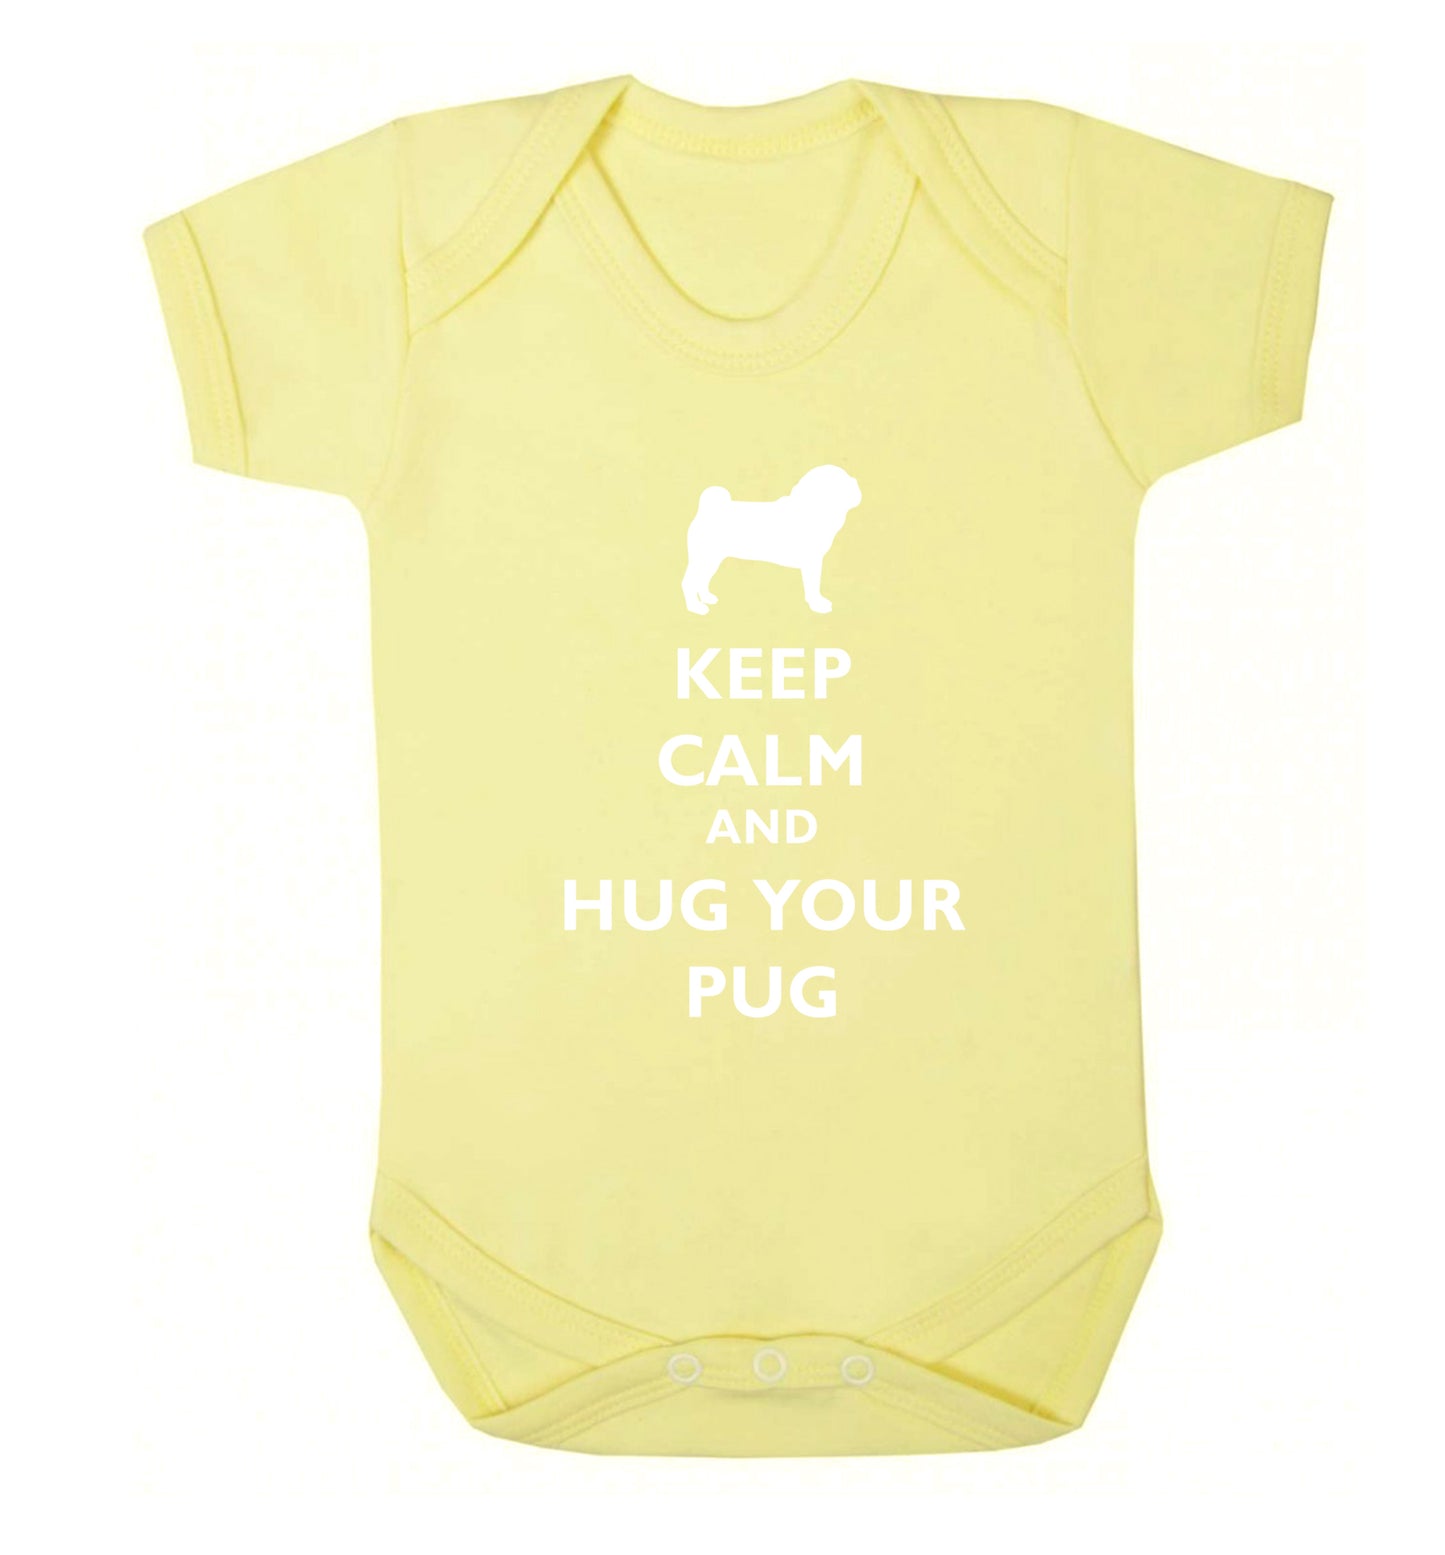 Keep calm and hug your pug Baby Vest pale yellow 18-24 months